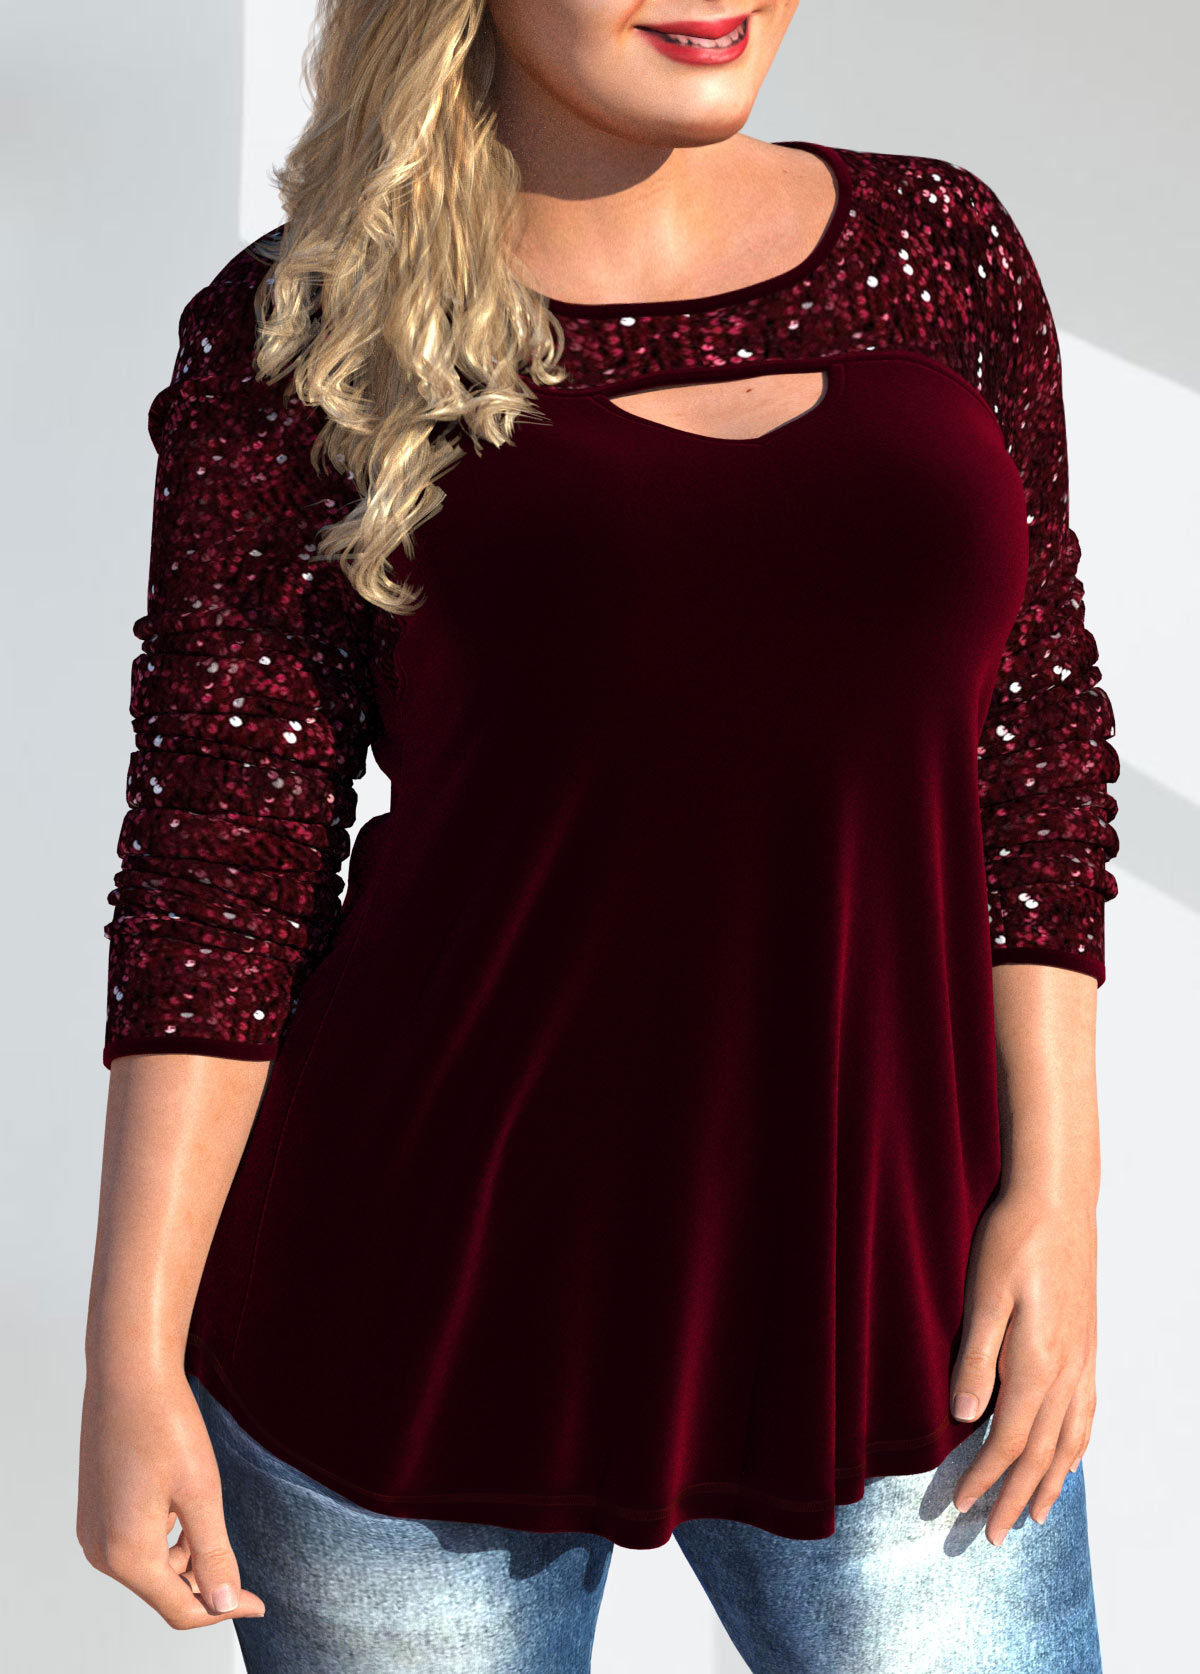 Plus Size Christmas Design Wine Red T Shirt